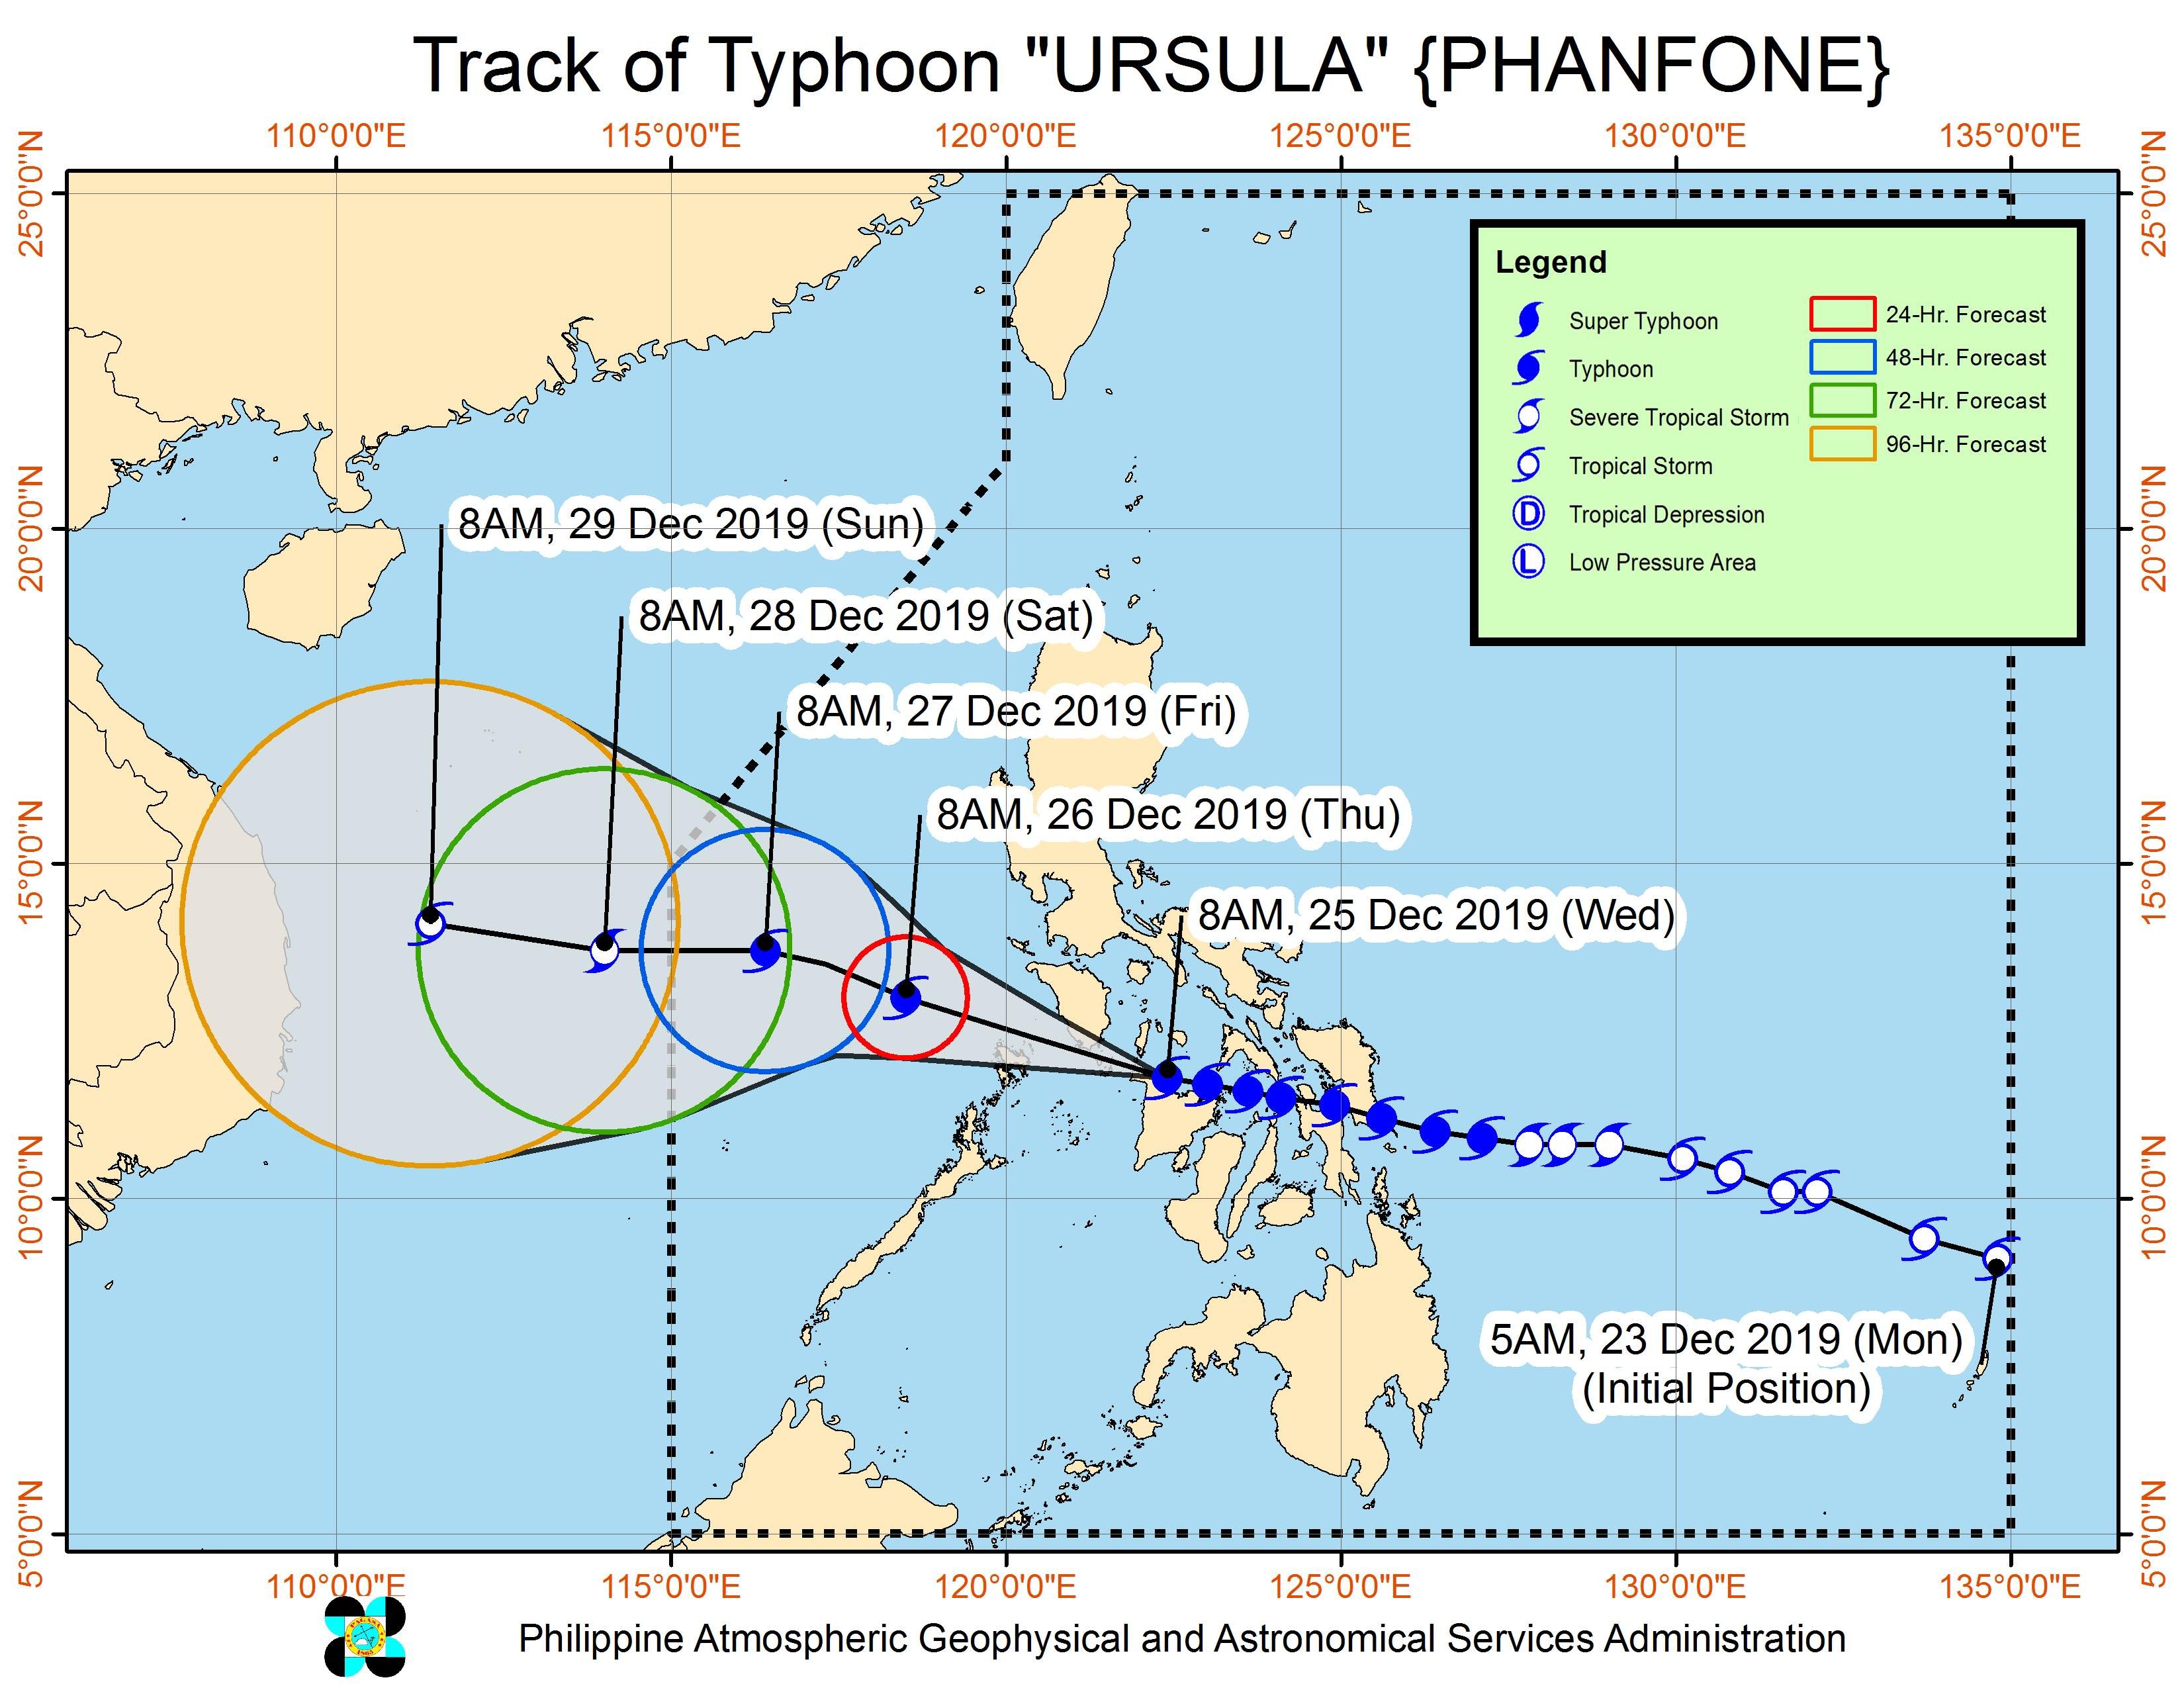 Forecast track of Typhoon Ursula (Phanfone) as of December 25, 2019, 11 am. Image from PAGASA 